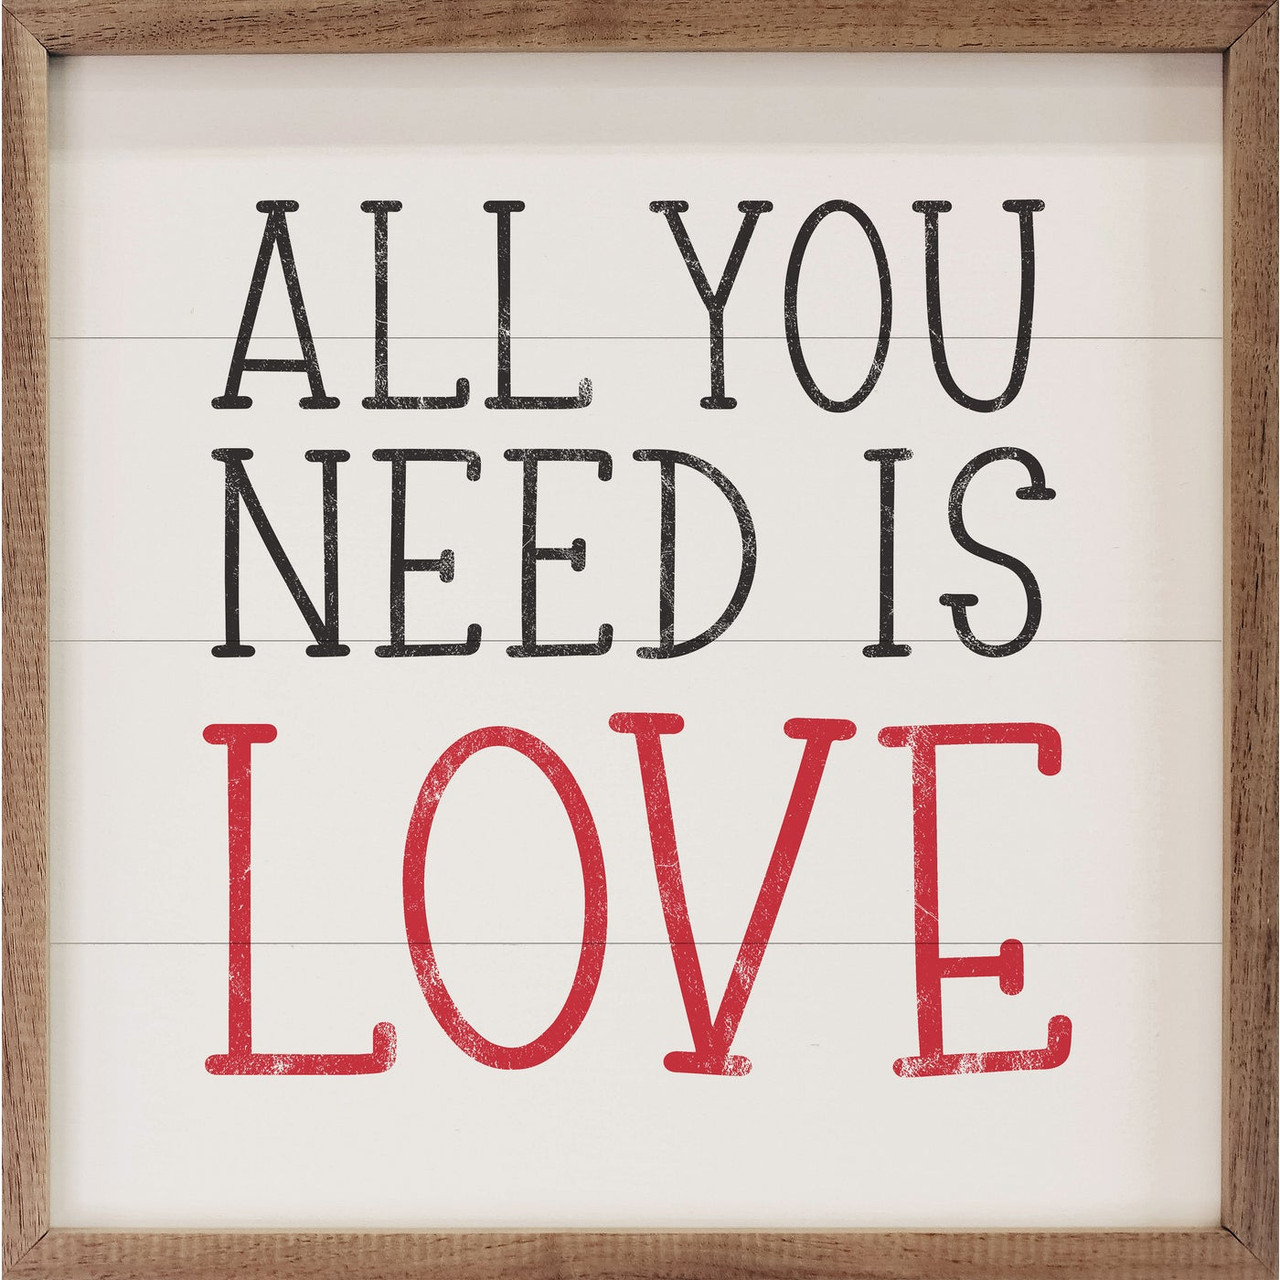 https://cdn11.bigcommerce.com/s-da66a/images/stencil/1280x1280/products/30150/53385/16x16_-_All_You_Need_Is_Love_-_4AYNLSI1616_lg__59886.1675783504.jpg?c=2